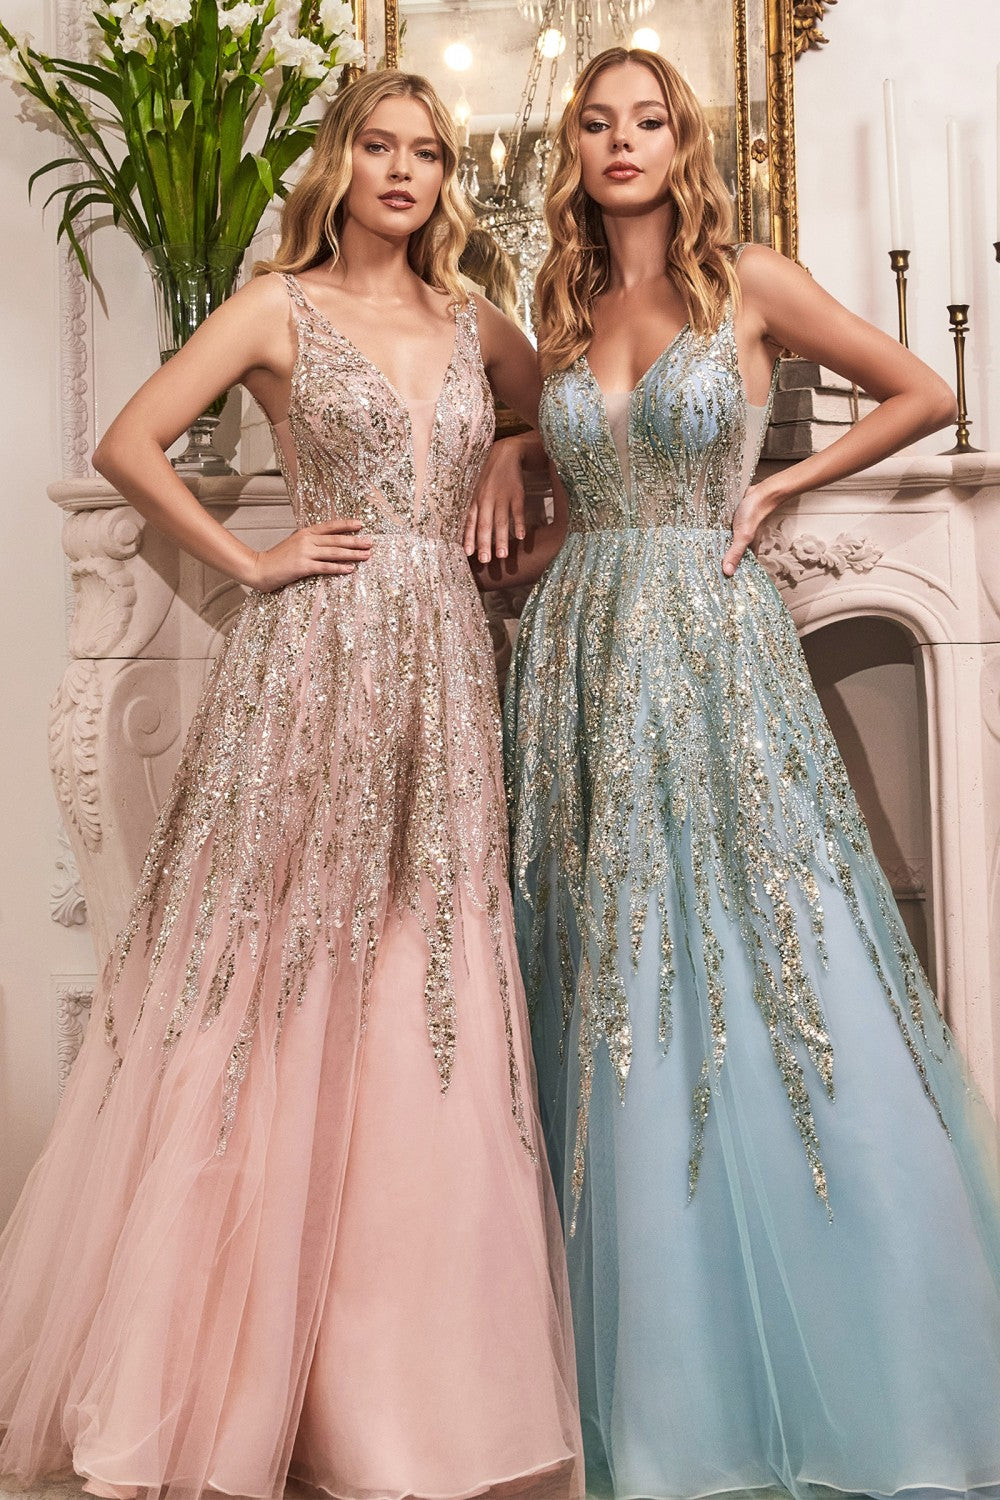 Dance the night away in this layered tulle ball gown. Shimmering glitter and bead embellishment adorn this gown from bodice to skirt. Styled with a deep plunging neckline, open back and illusion cut out sides.